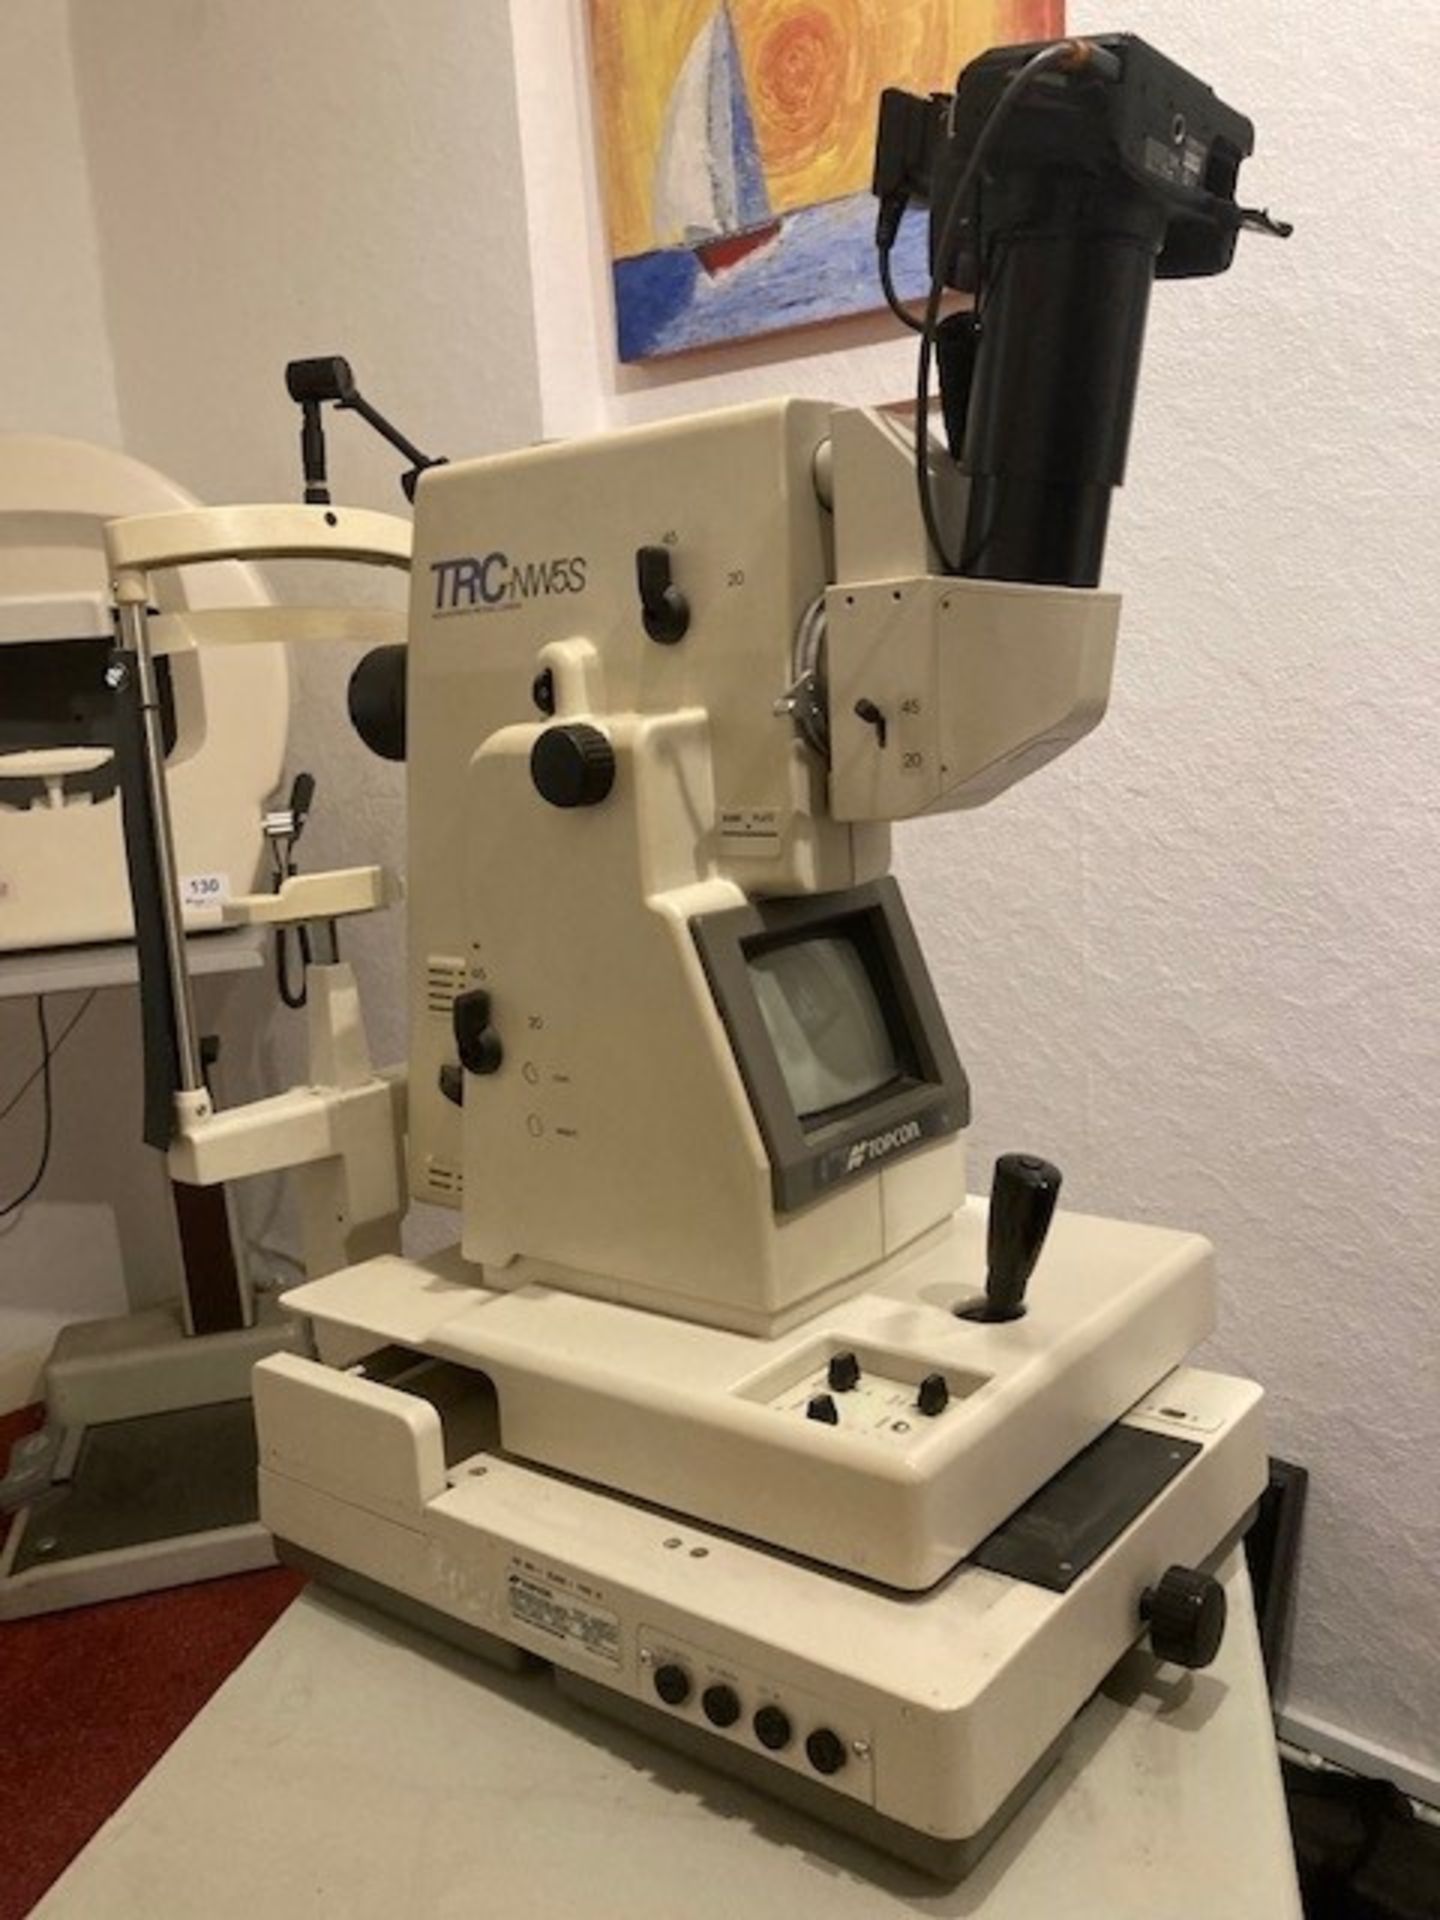 Topcon TRC-NW5S non mydriatic retinal camera with height adjustable table